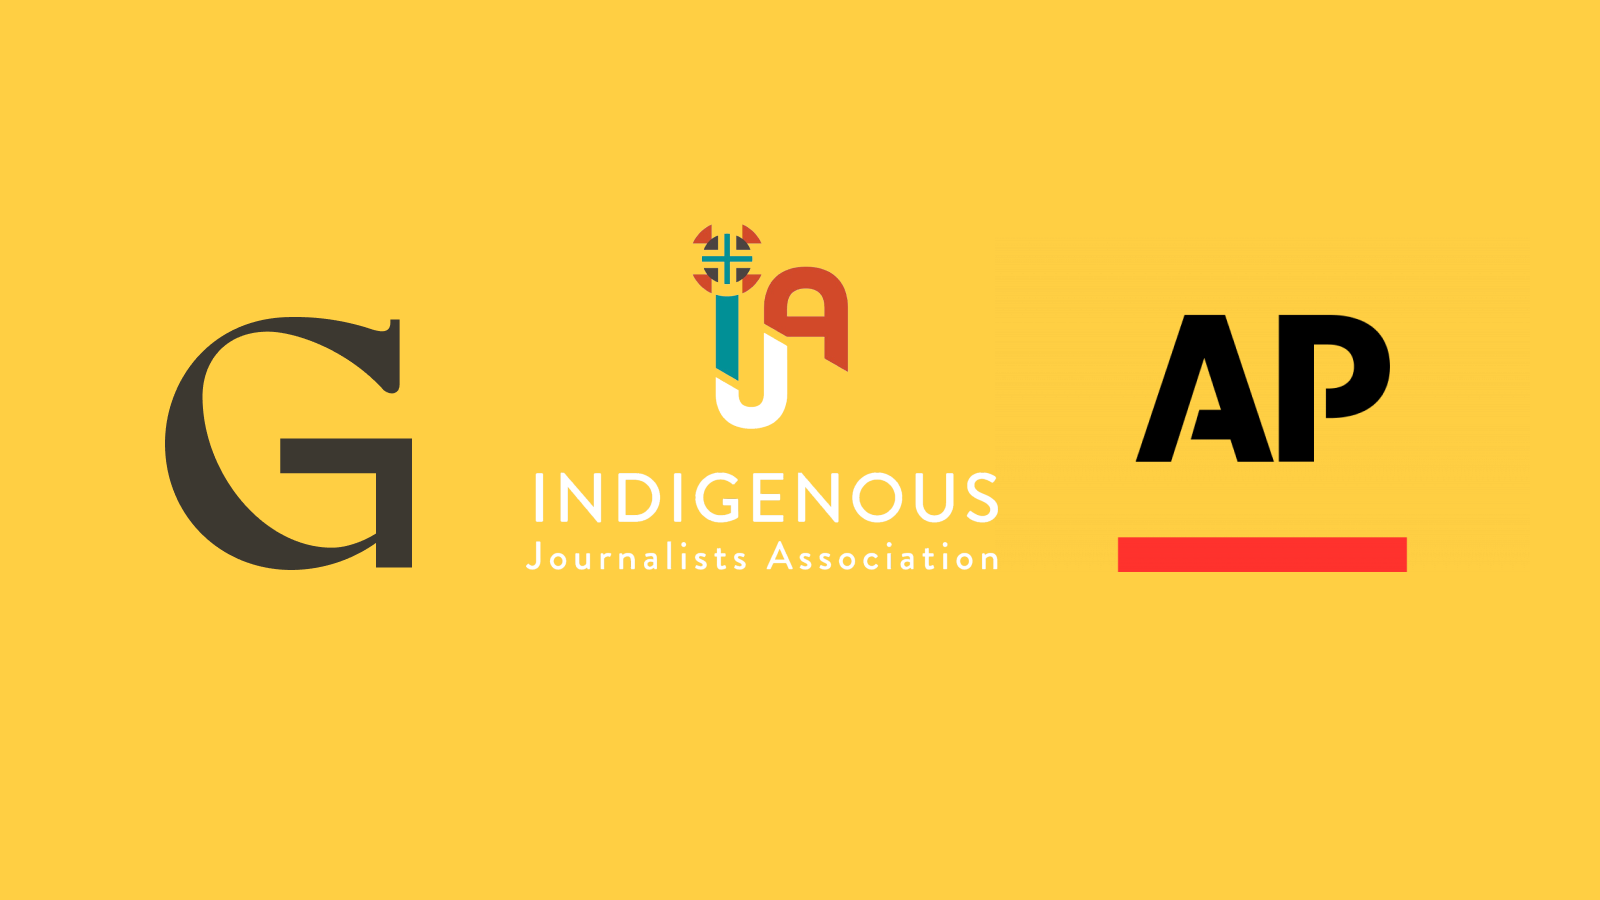 A yellow rectangle shows the logos for Grist, IJA, and AP.